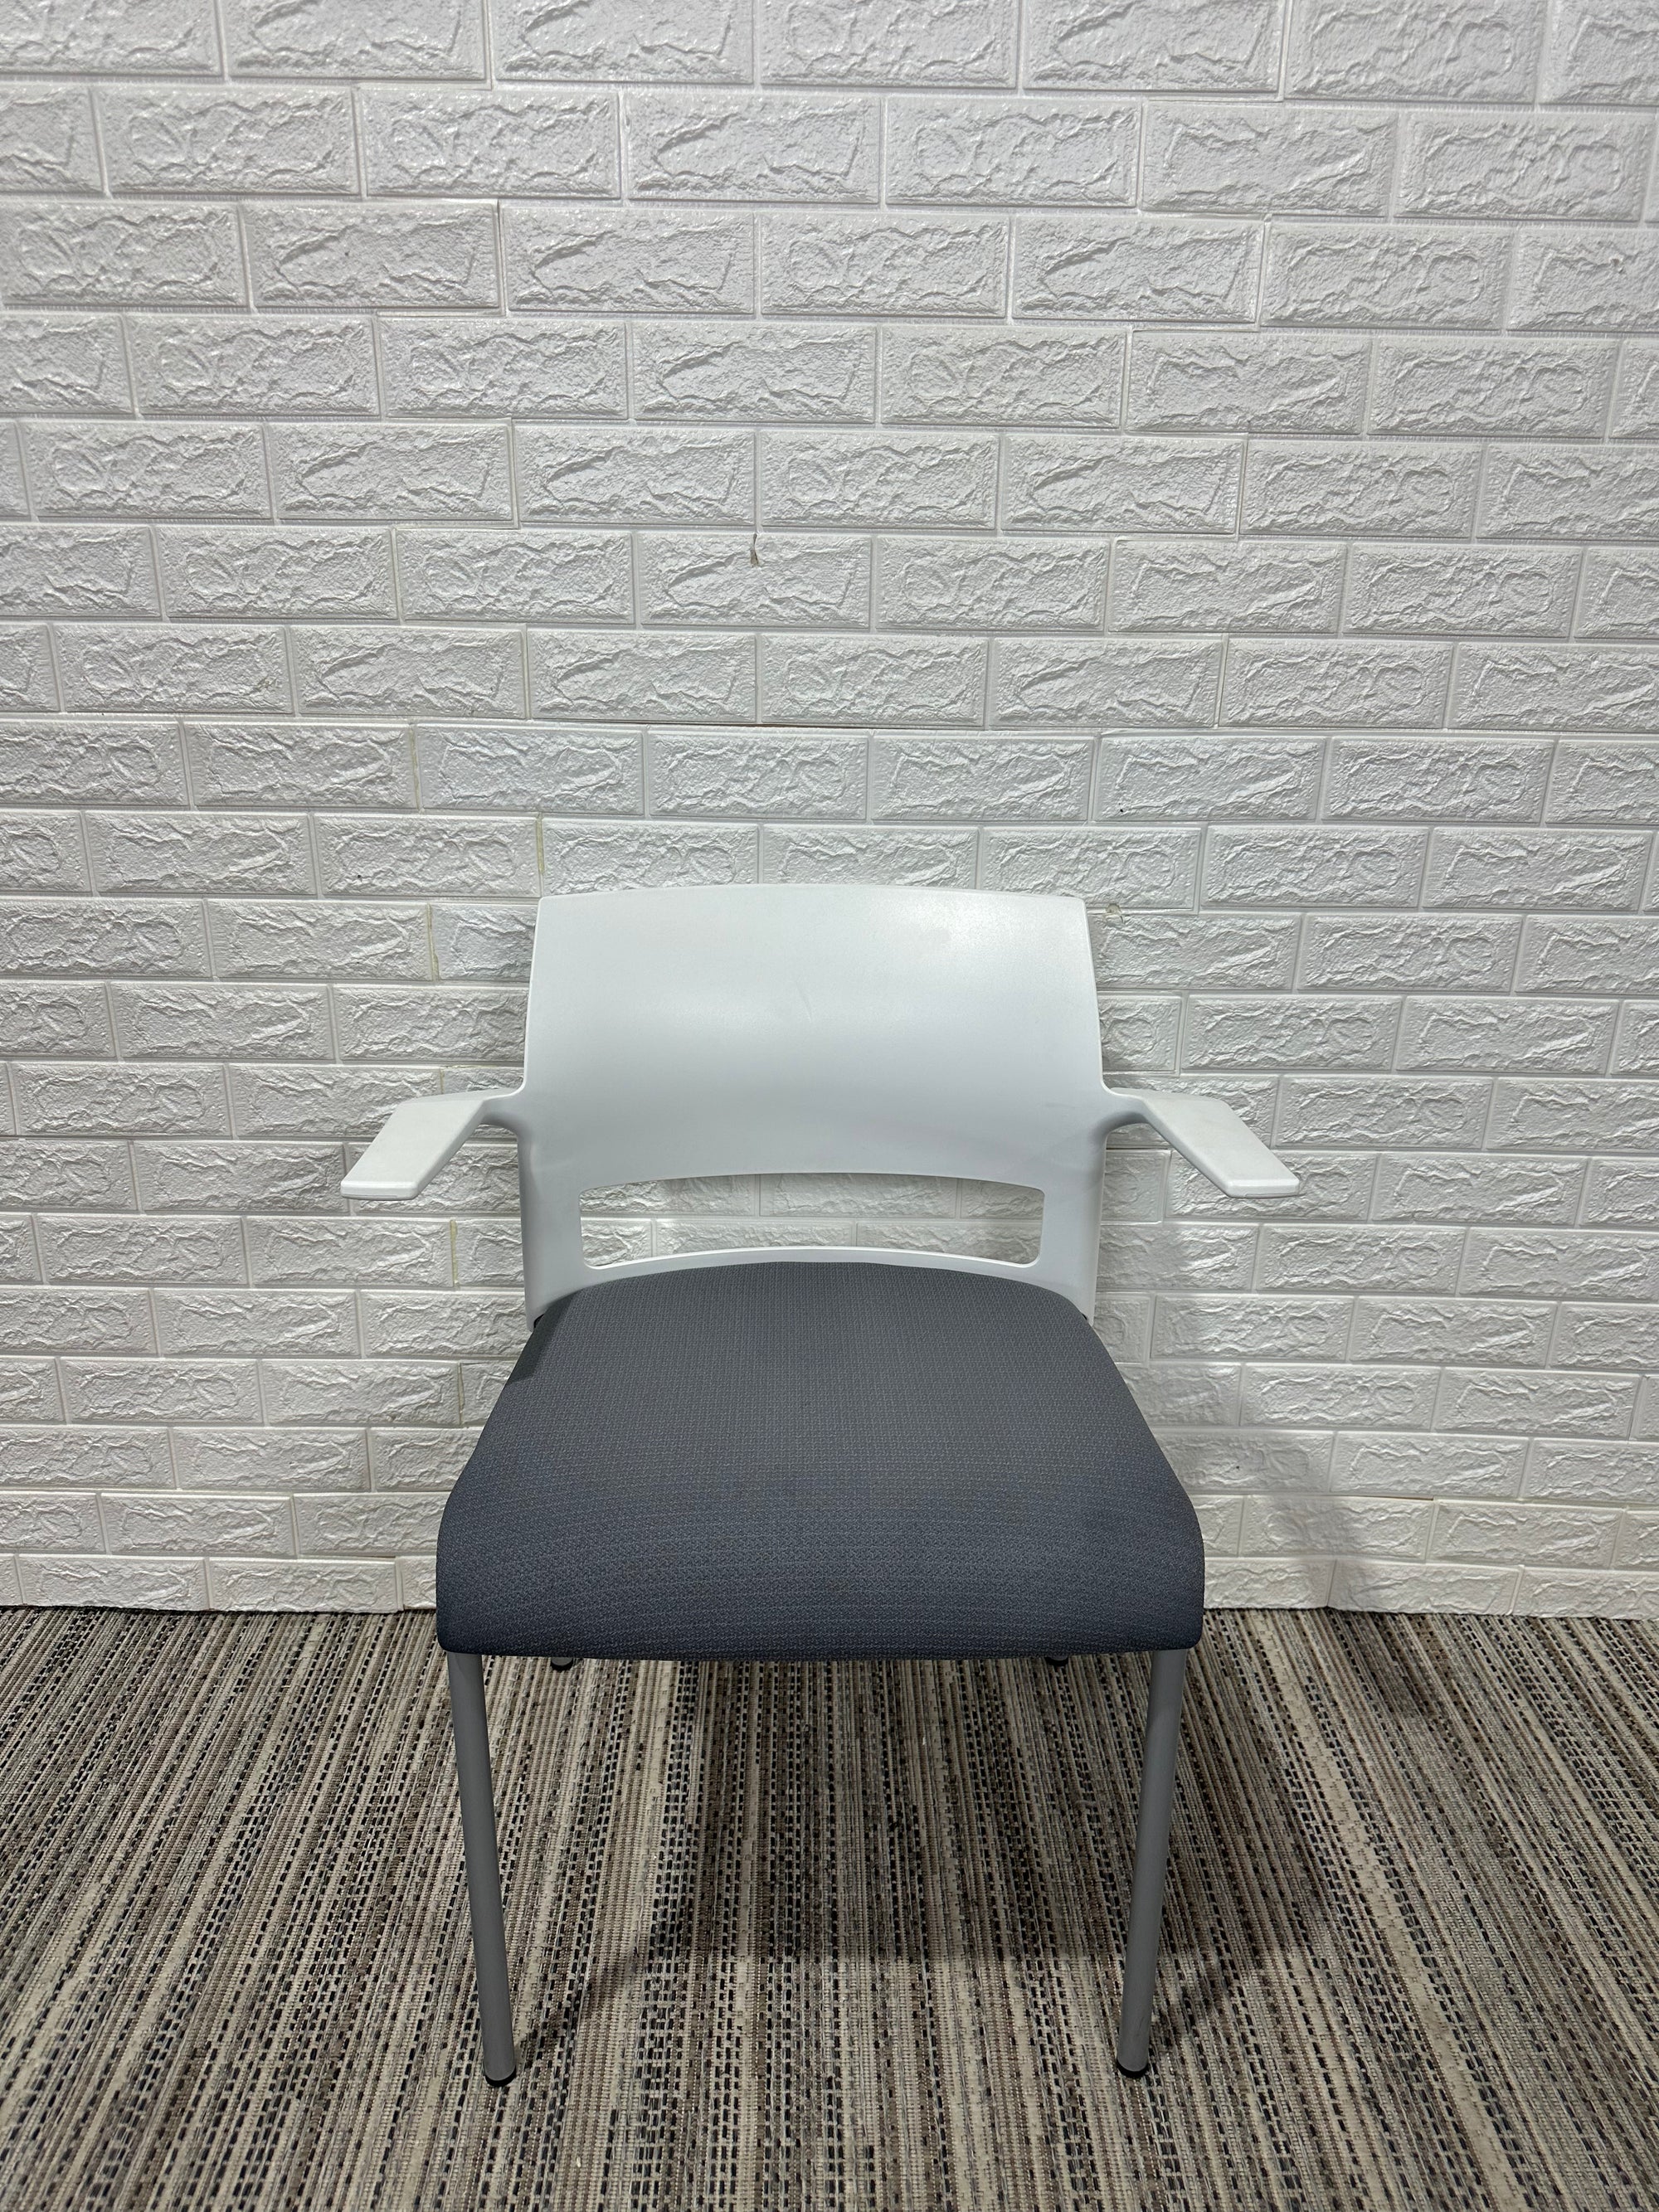 Pre-Owned Steelcase White Stacking Chair - Duckys Office Furniture